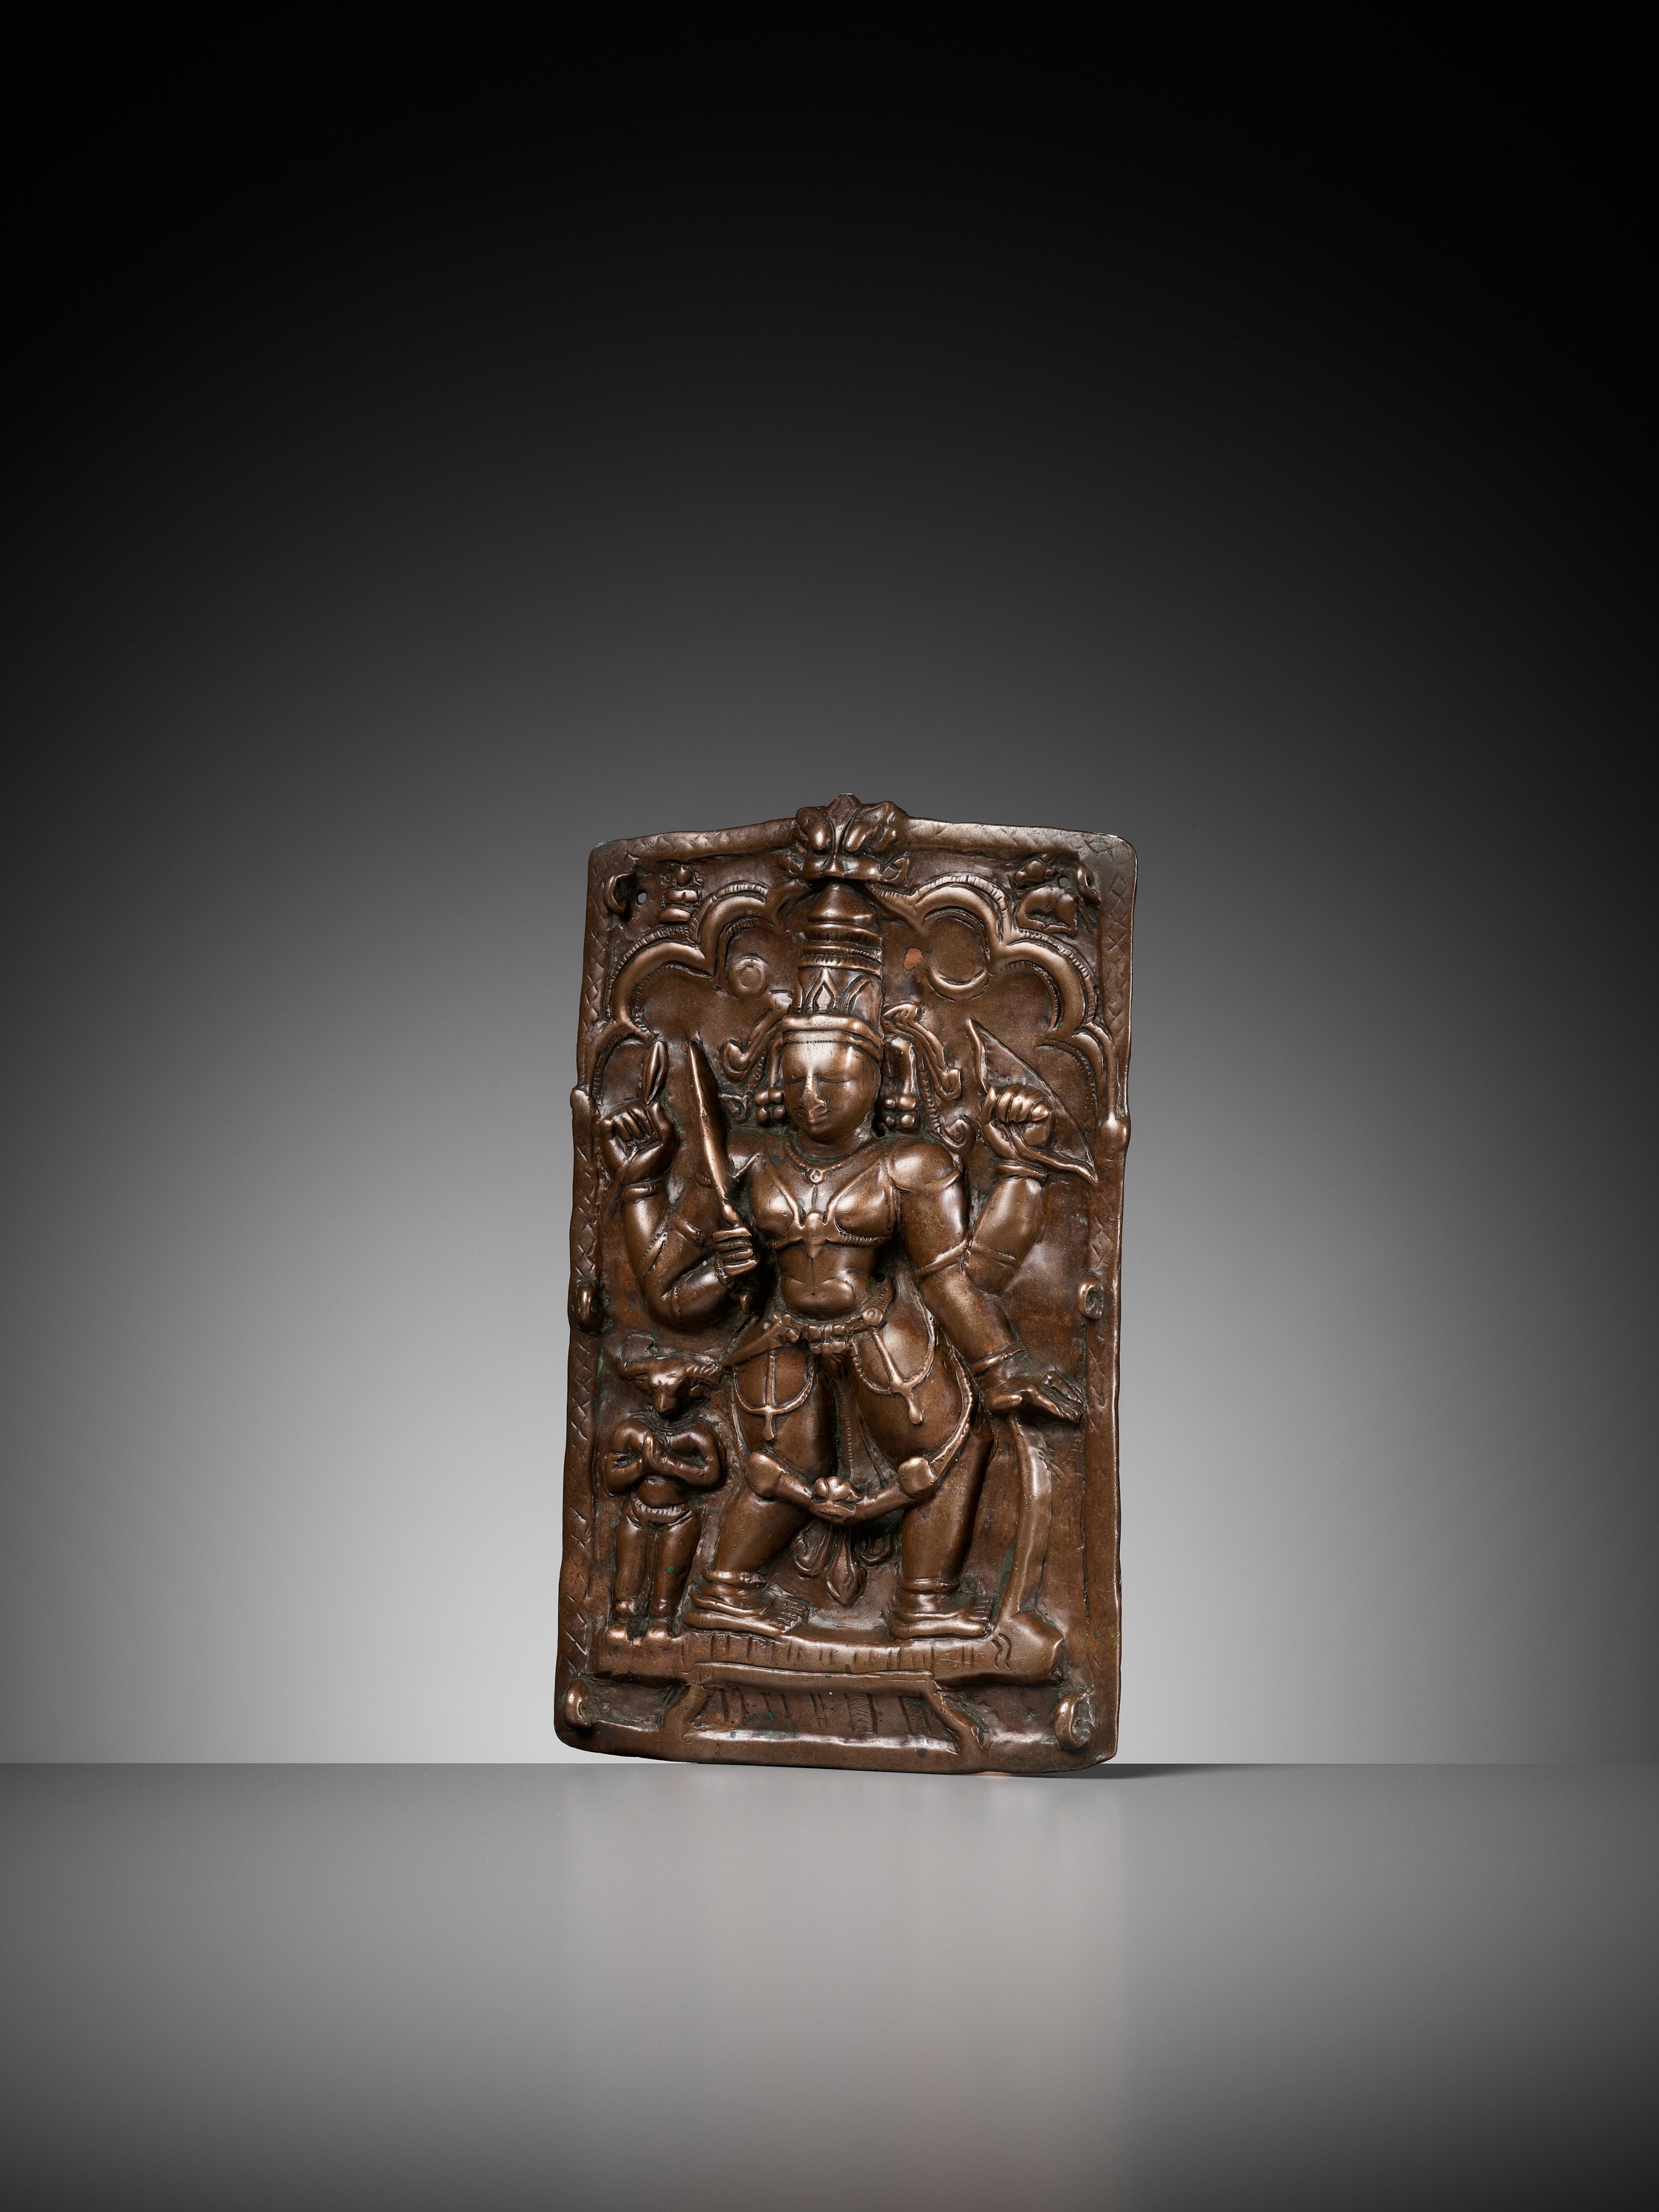 A CEREMONIAL COPPER SHIELD DEPICTING VIRABHADRA, 17TH-18TH CENTURY - Image 5 of 9